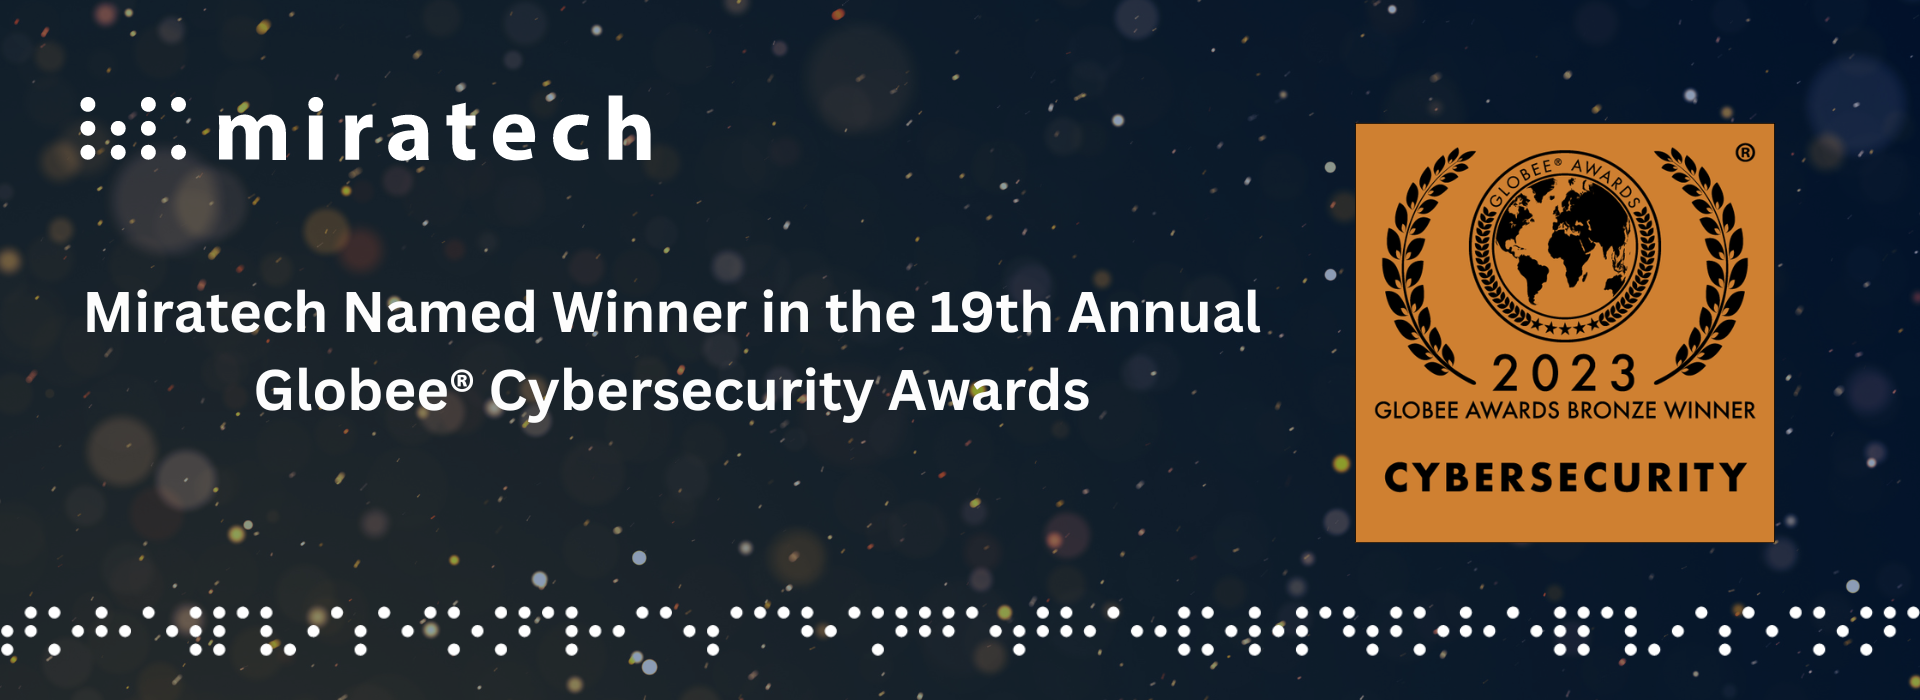 Miratech Named Winner in the 19th Annual Globee® Cybersecurity Awards